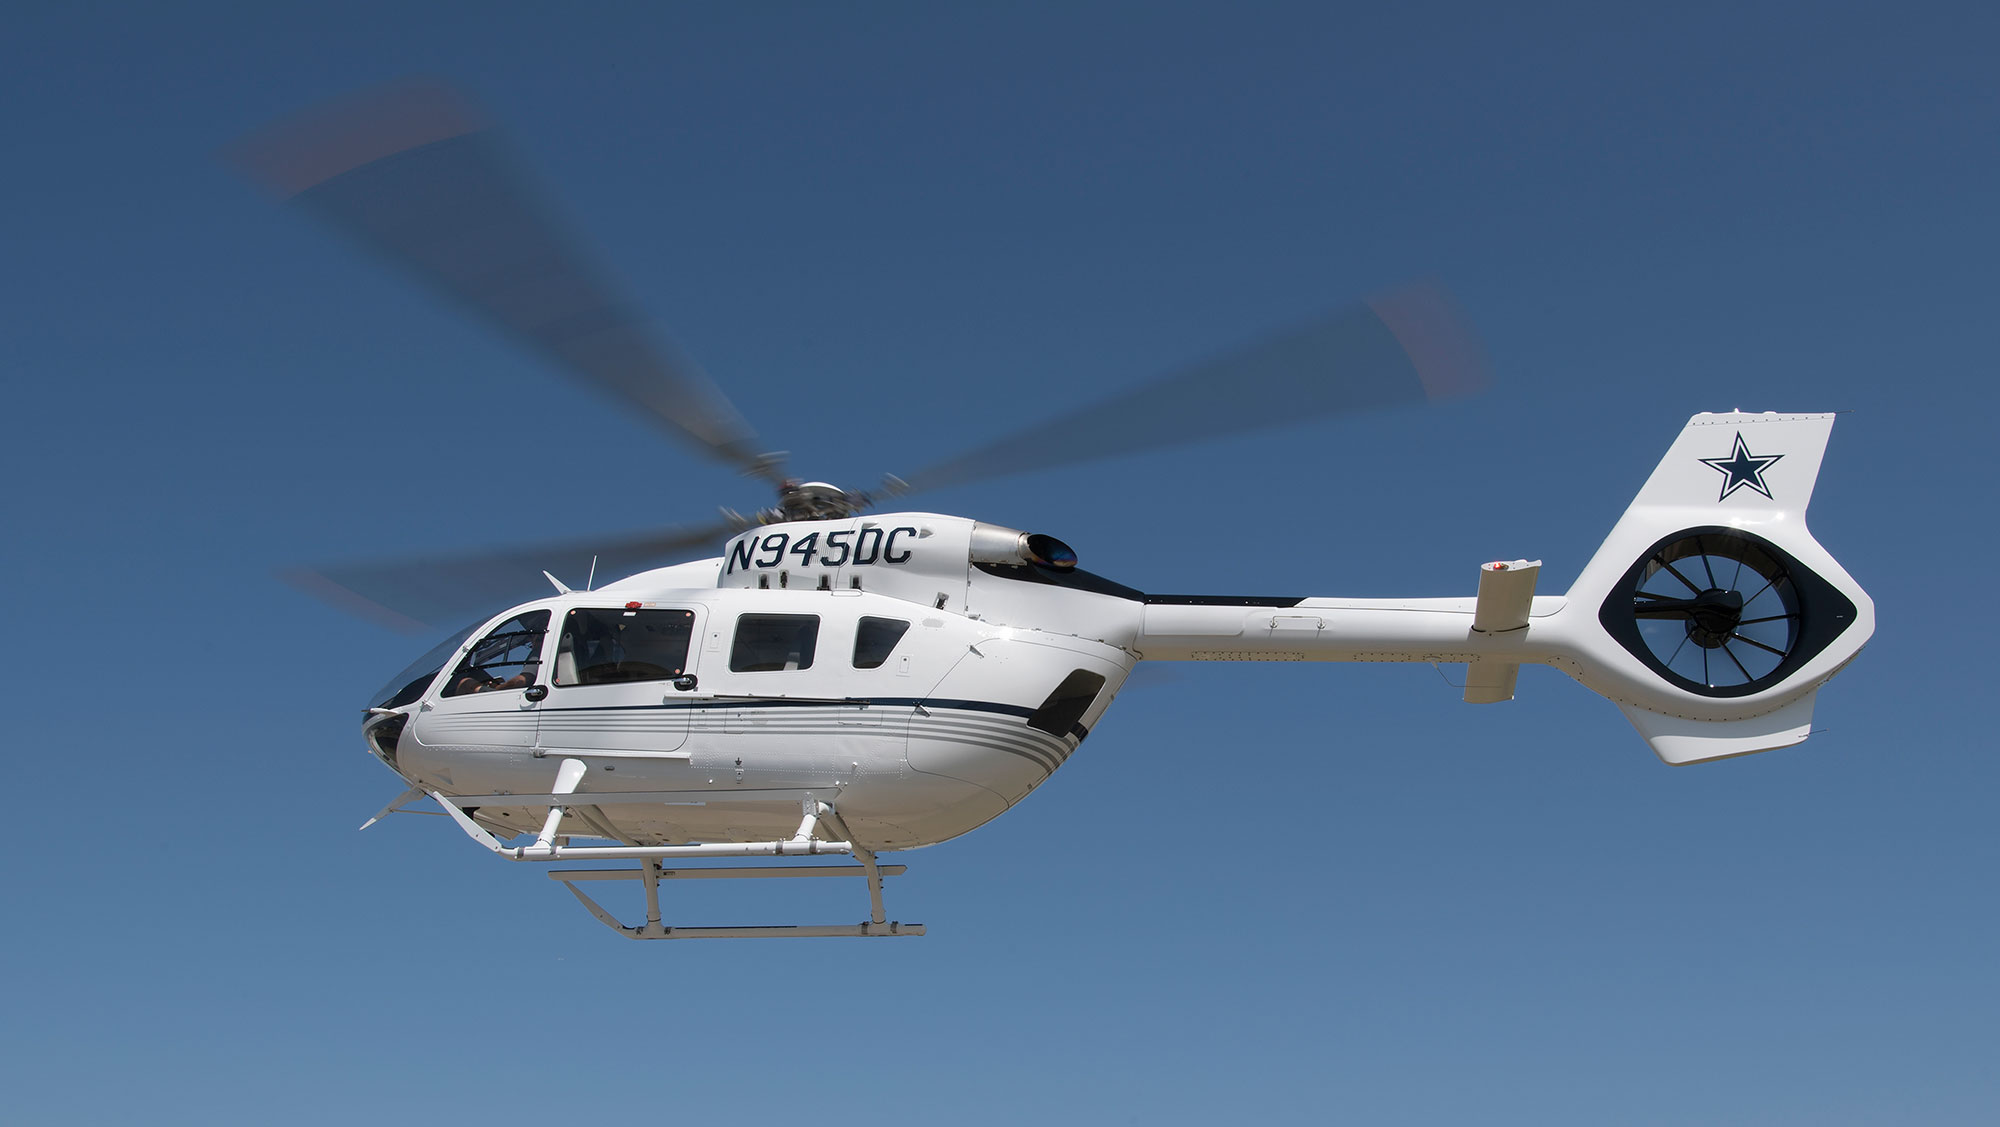 Dallas Cowboys Score with New Airbus H145 Helicopter... and of course with Aveo lights!